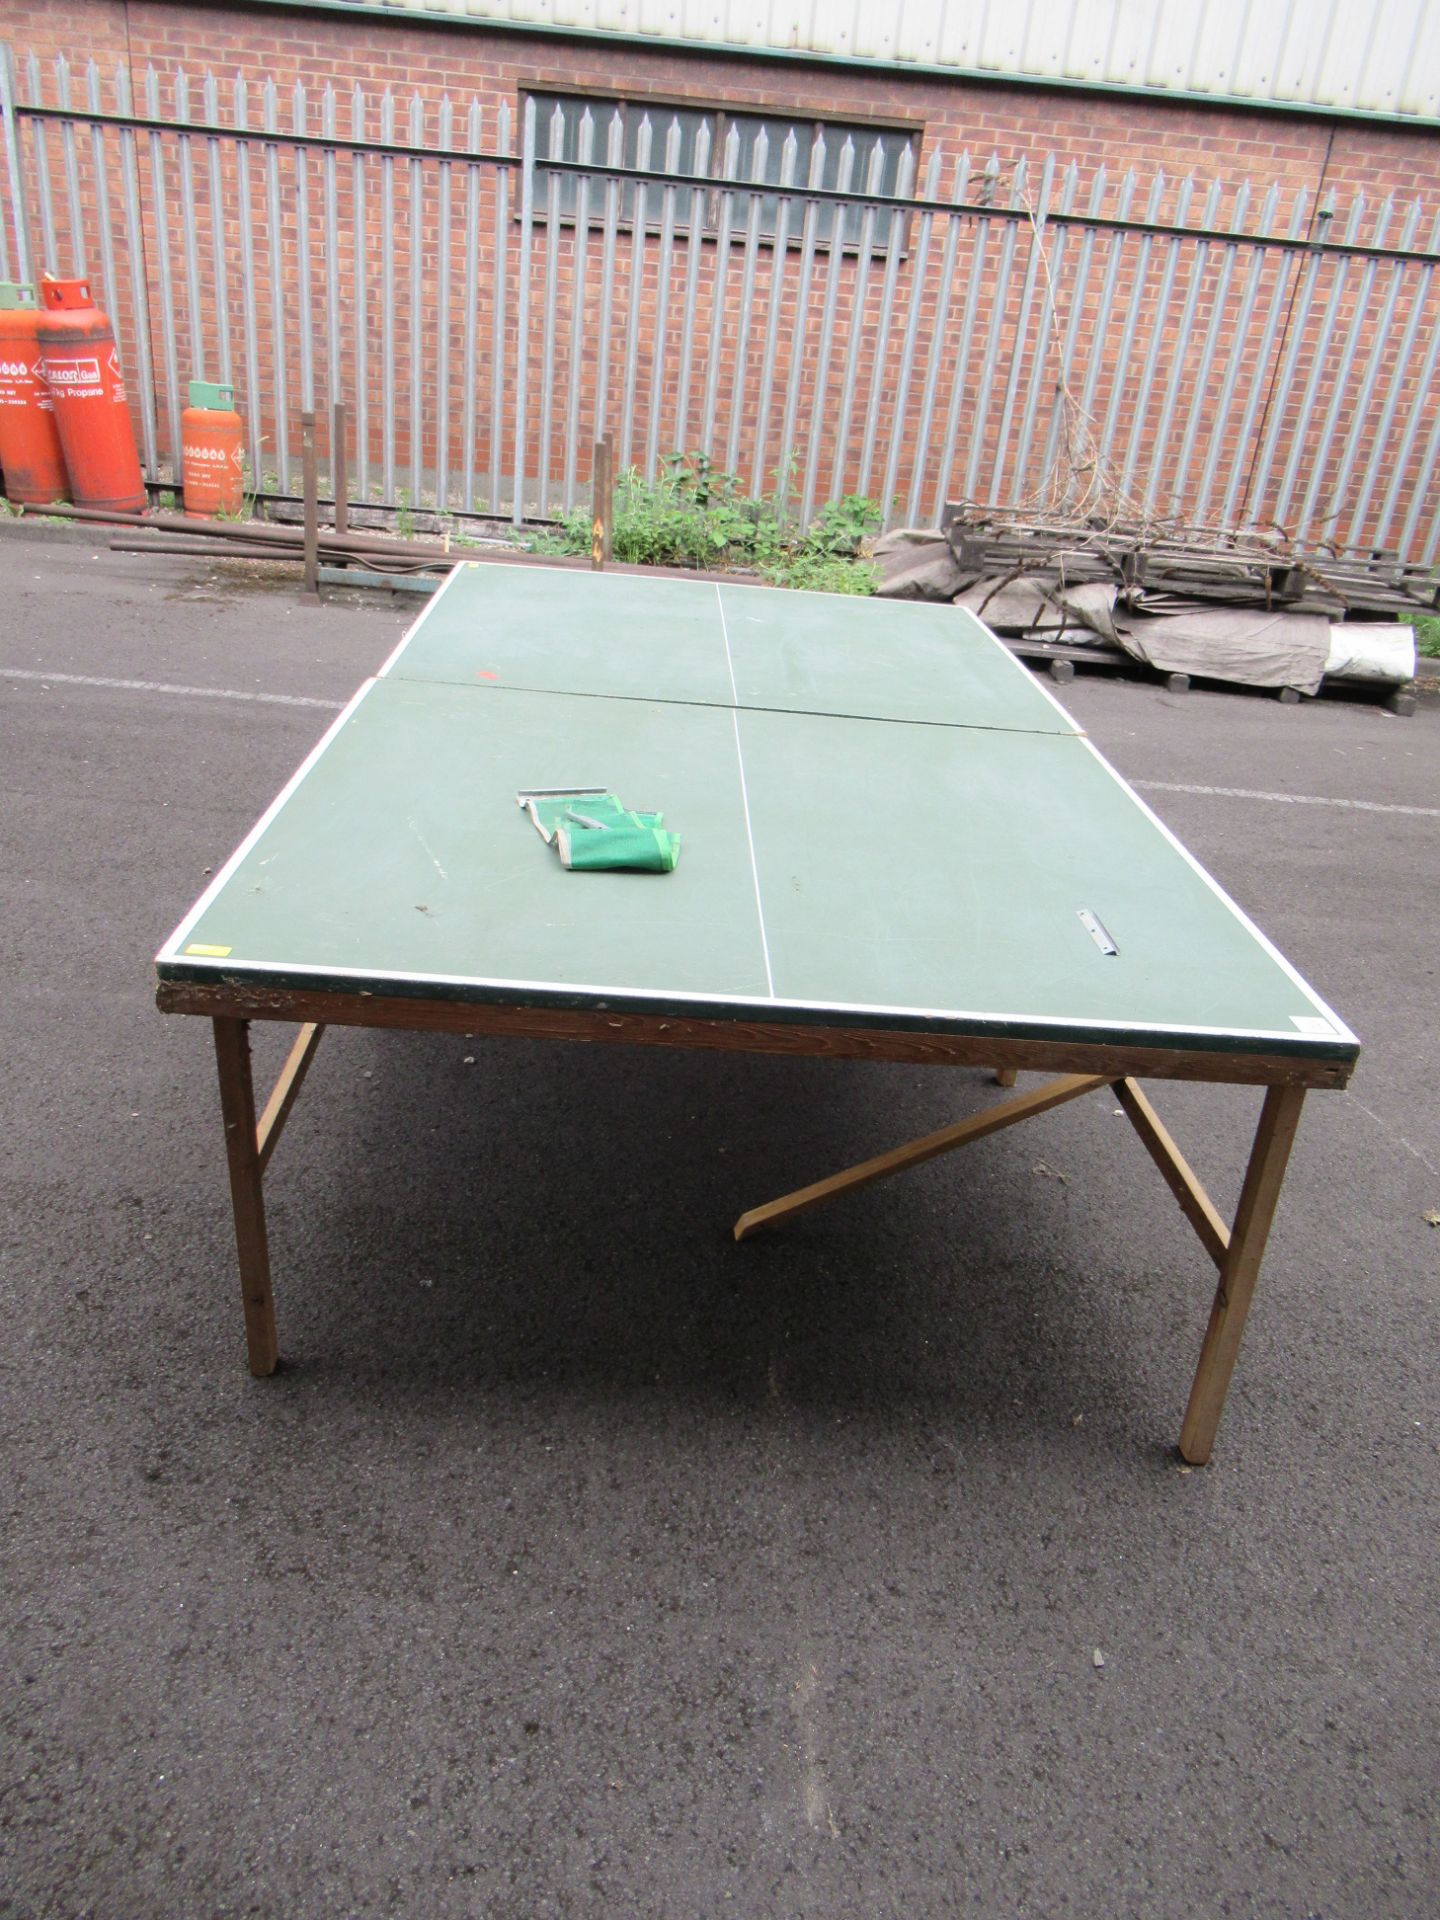 Spensport table-tennis table - Image 2 of 4